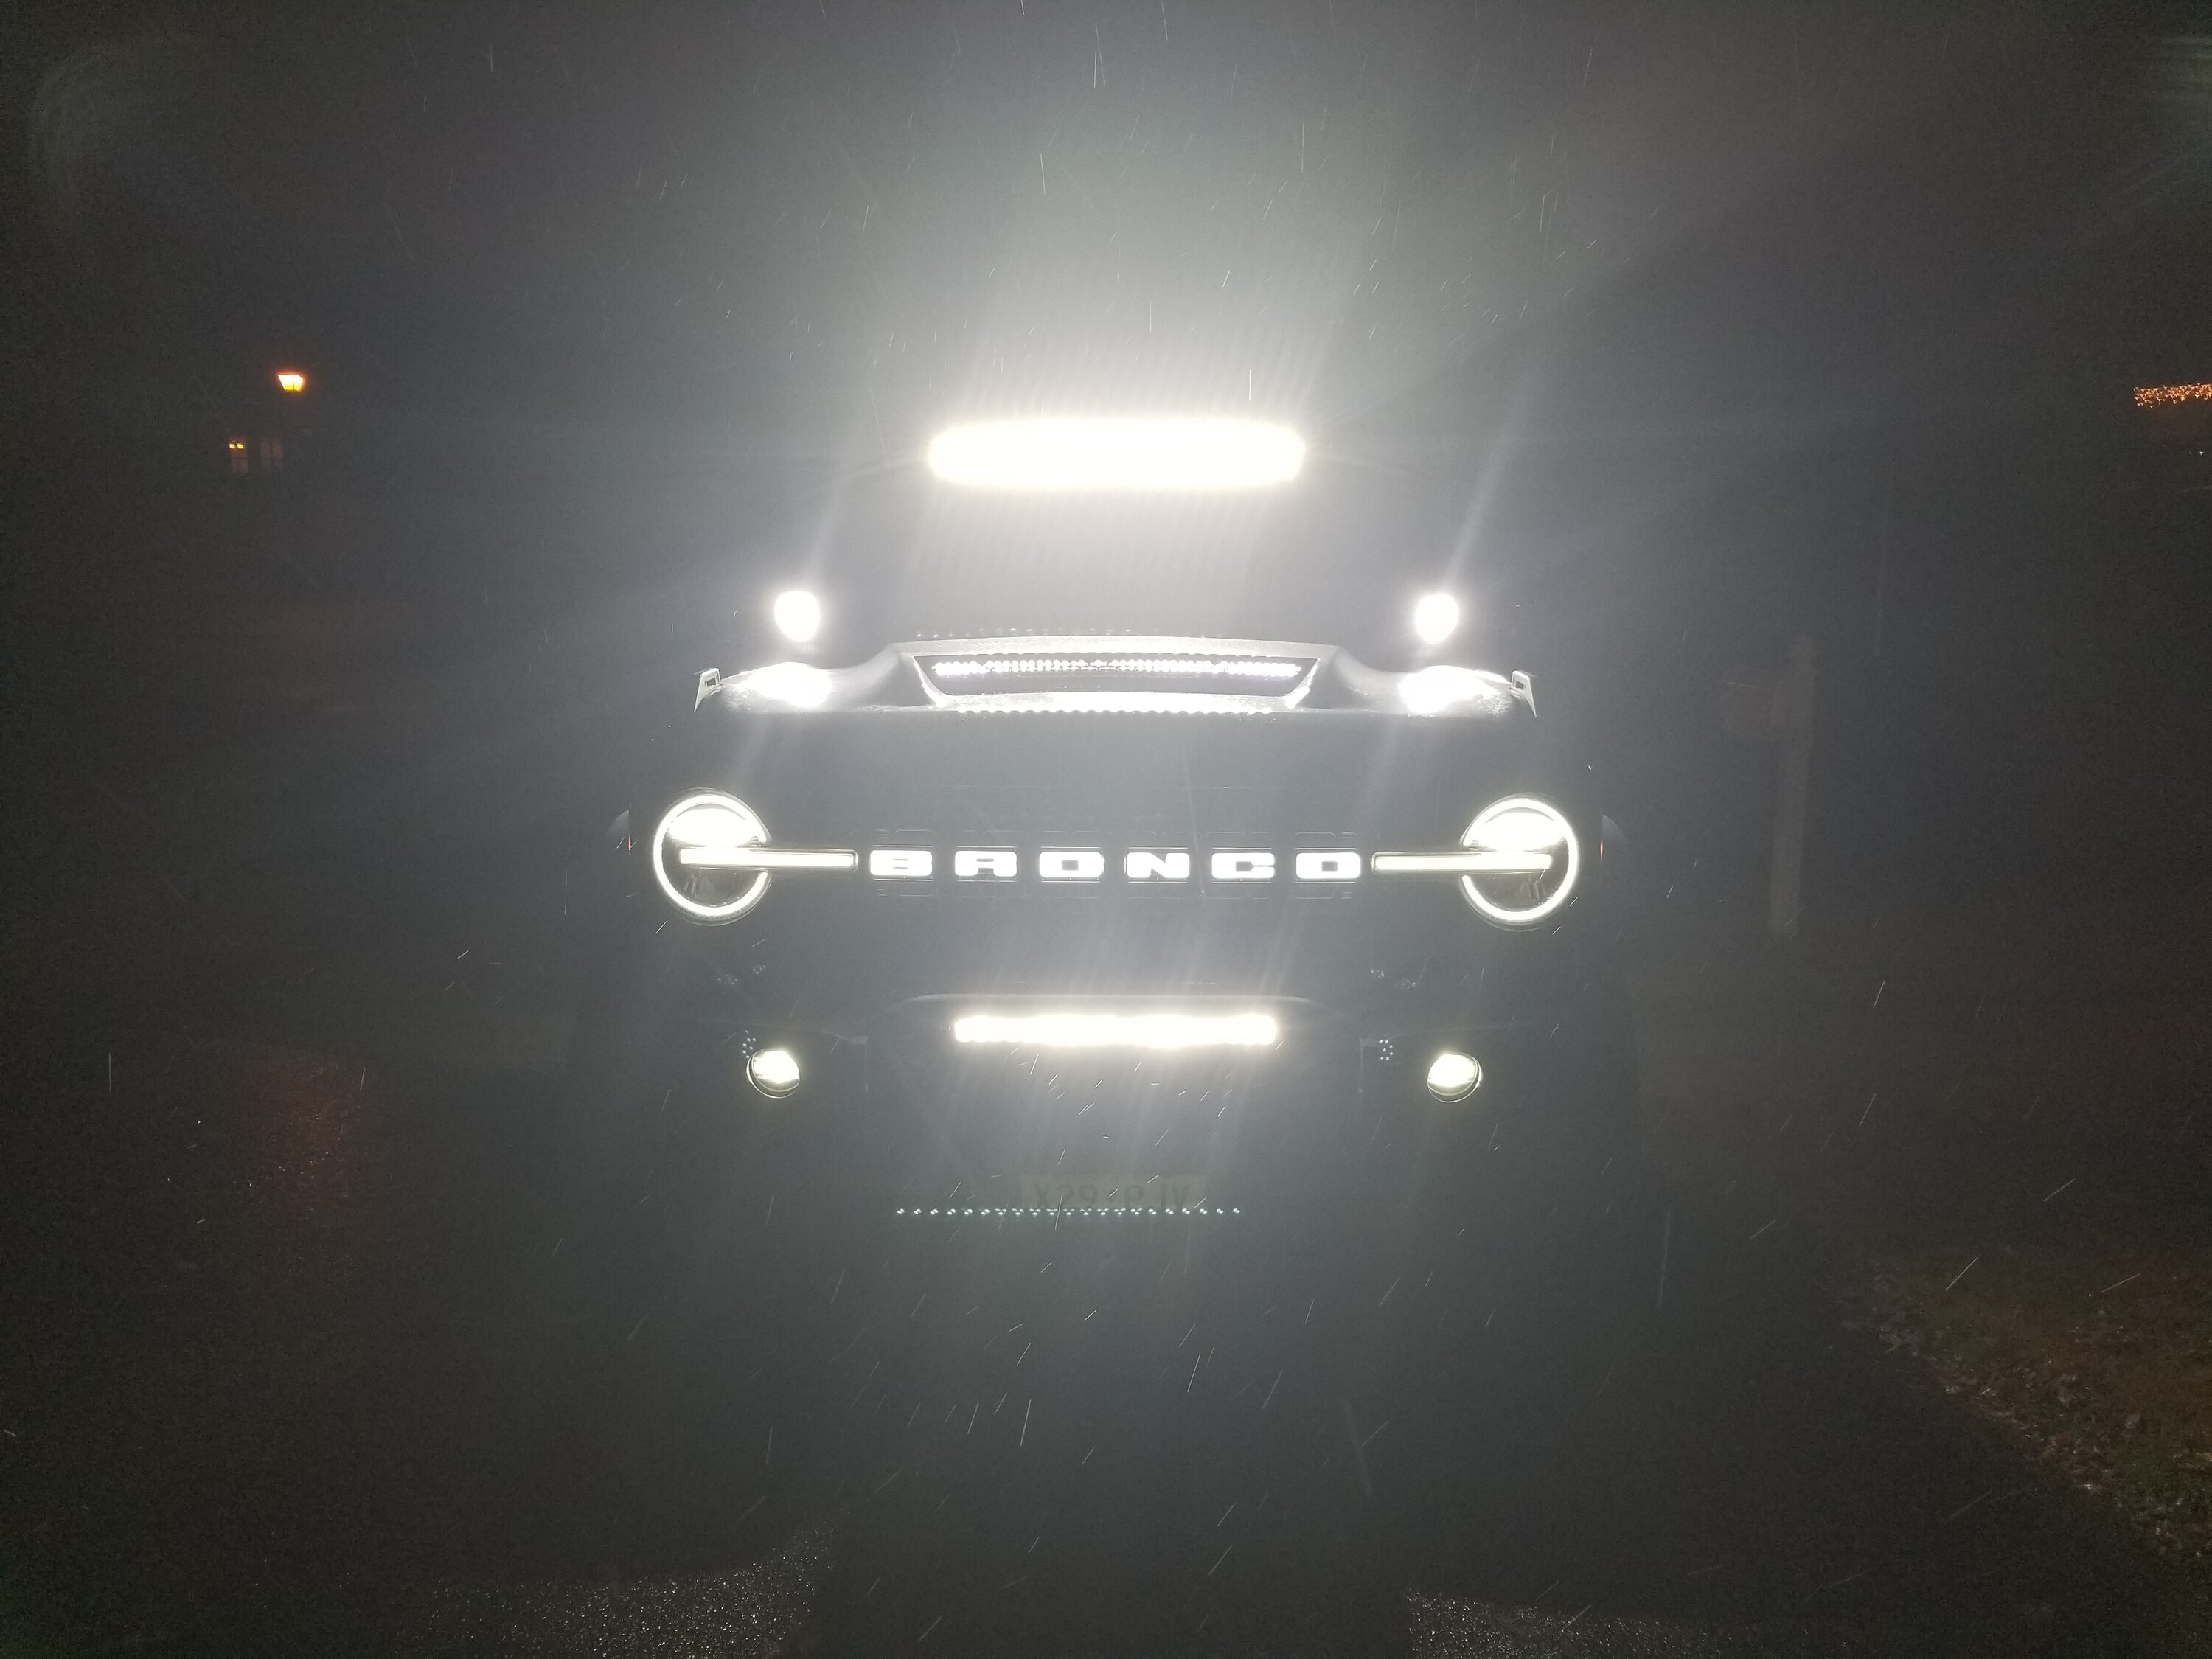 Ford Bronco Quake LED Trail Sight Delete DRL Kit w/ Sequential Turn Signal - Installed pics / videos & review 20221210_185653